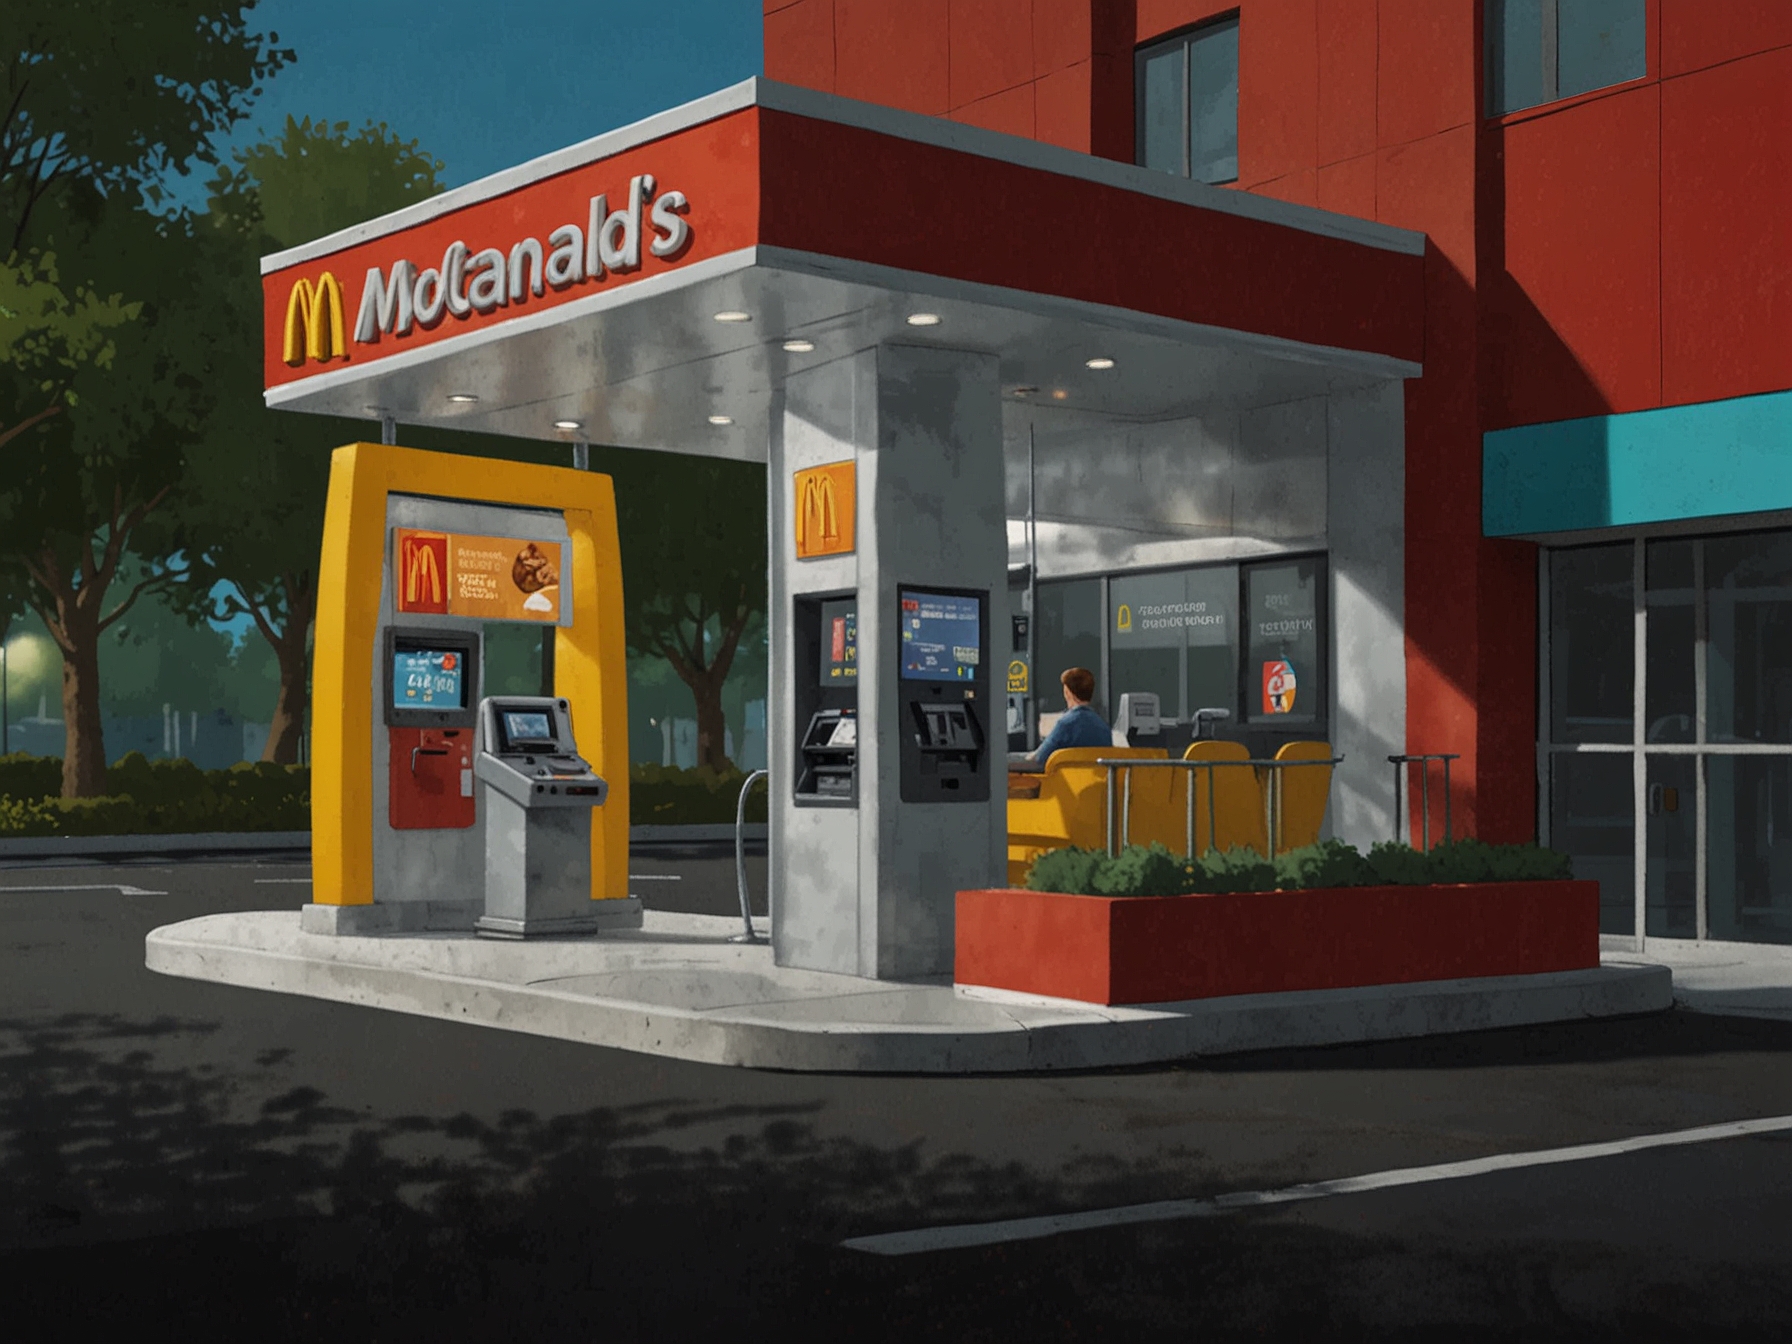 A McDonald's drive-thru where a car is interacting with an AI-powered ordering kiosk, showcasing the use of technology in streamlining customer service operations.